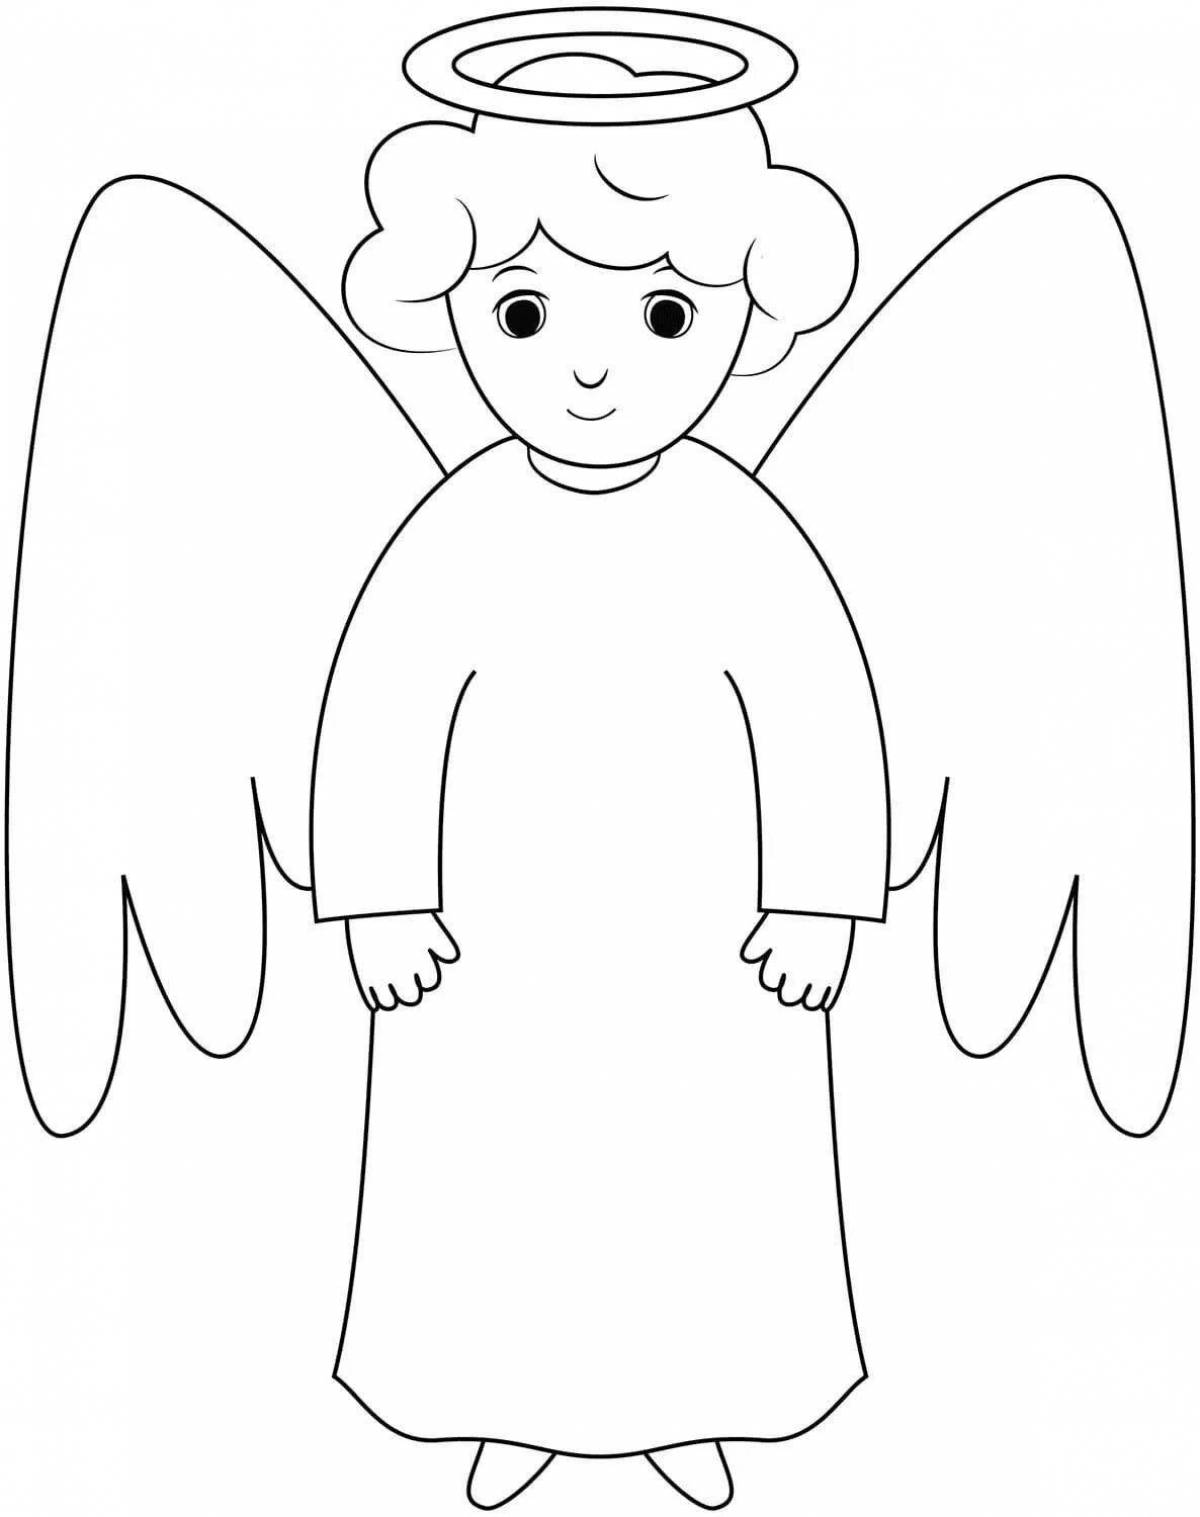 Angel face coloring book angel face